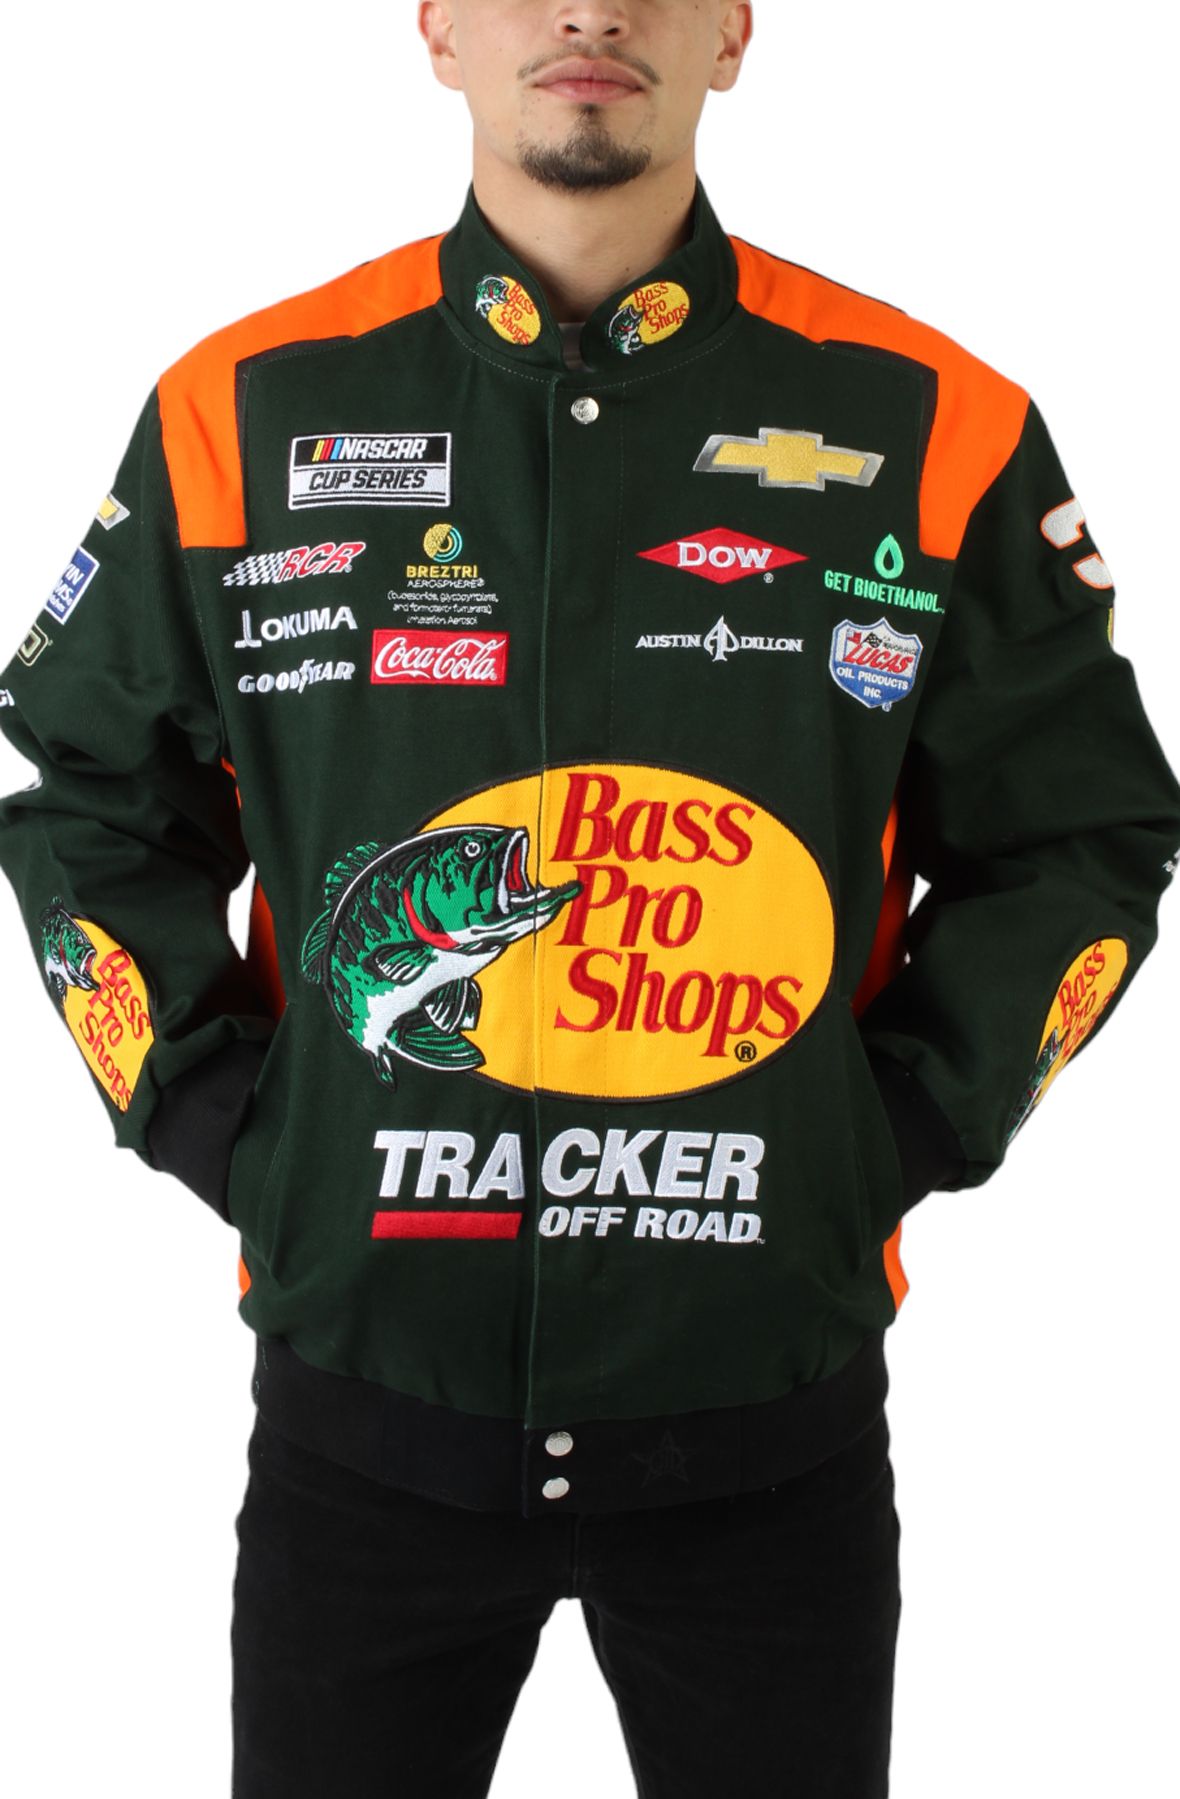 Bass Pro Shop Rain Jacket Men's Large Green Hooded w/ Patches and